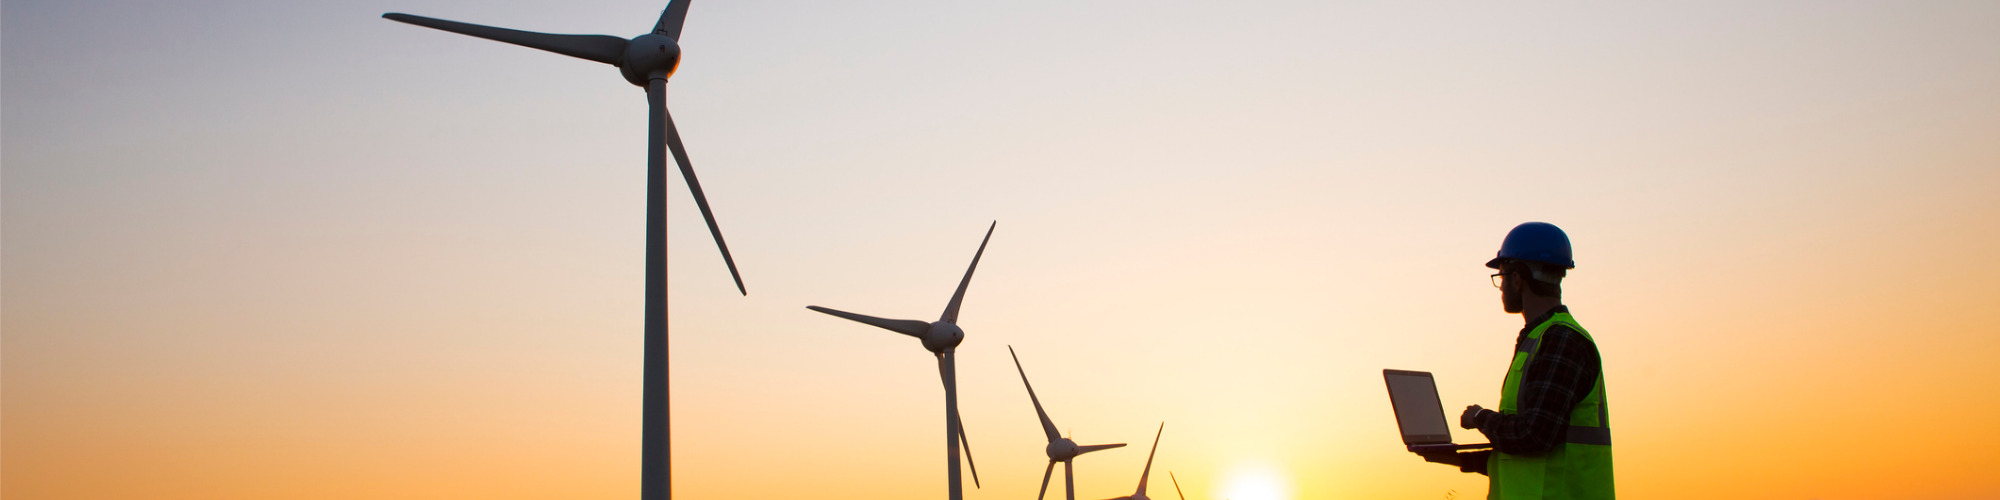 Option to Lease Agreements for Renewable Projects - Practical Guidance for Advisers in Scotland